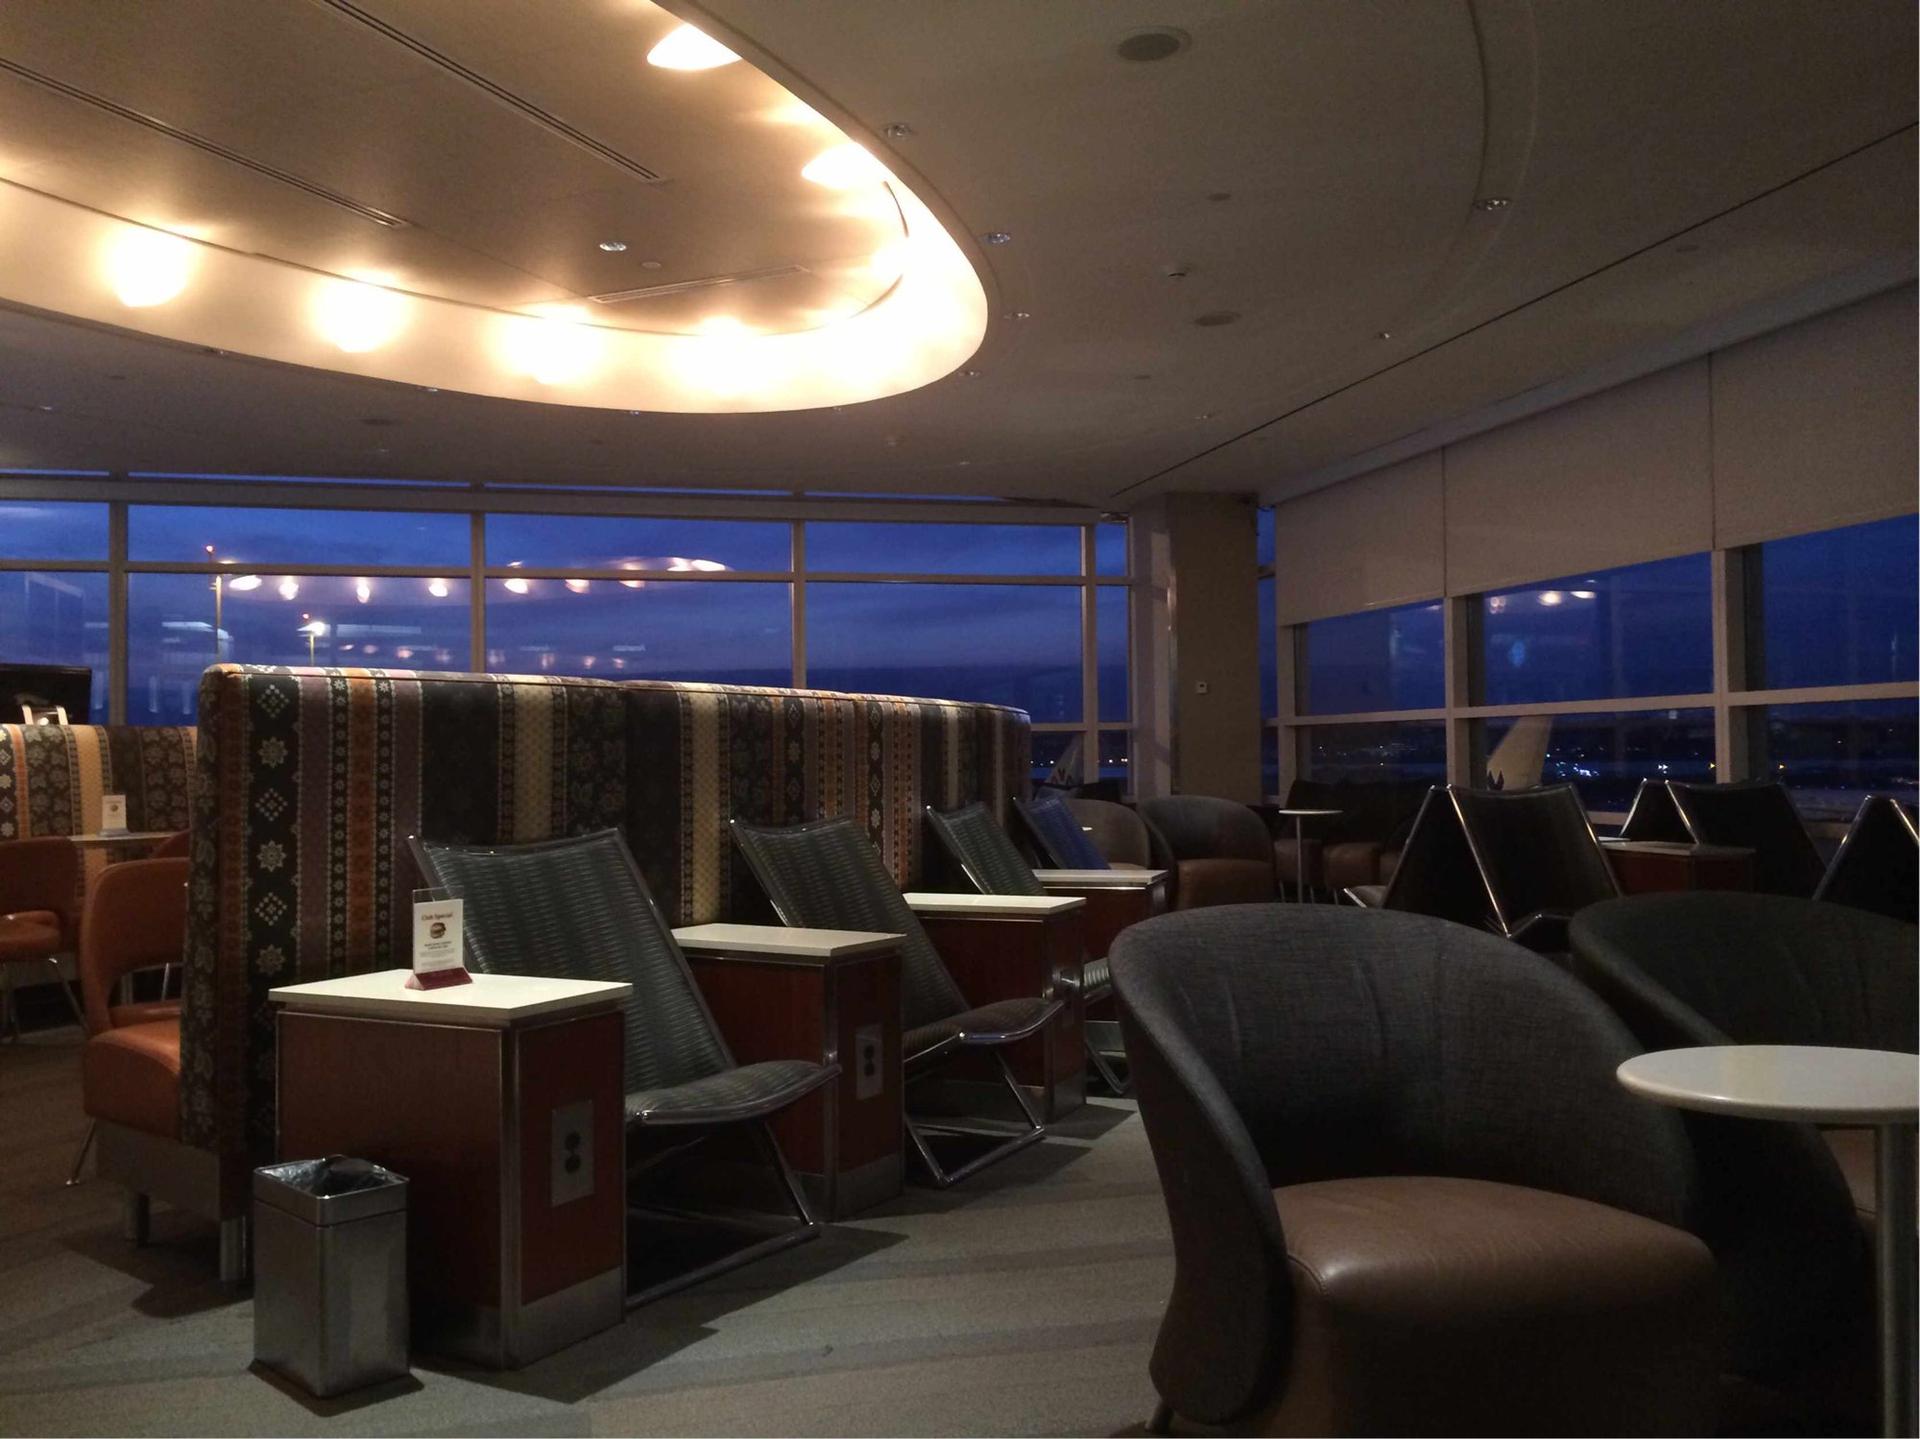 American Airlines Admirals Club image 2 of 22